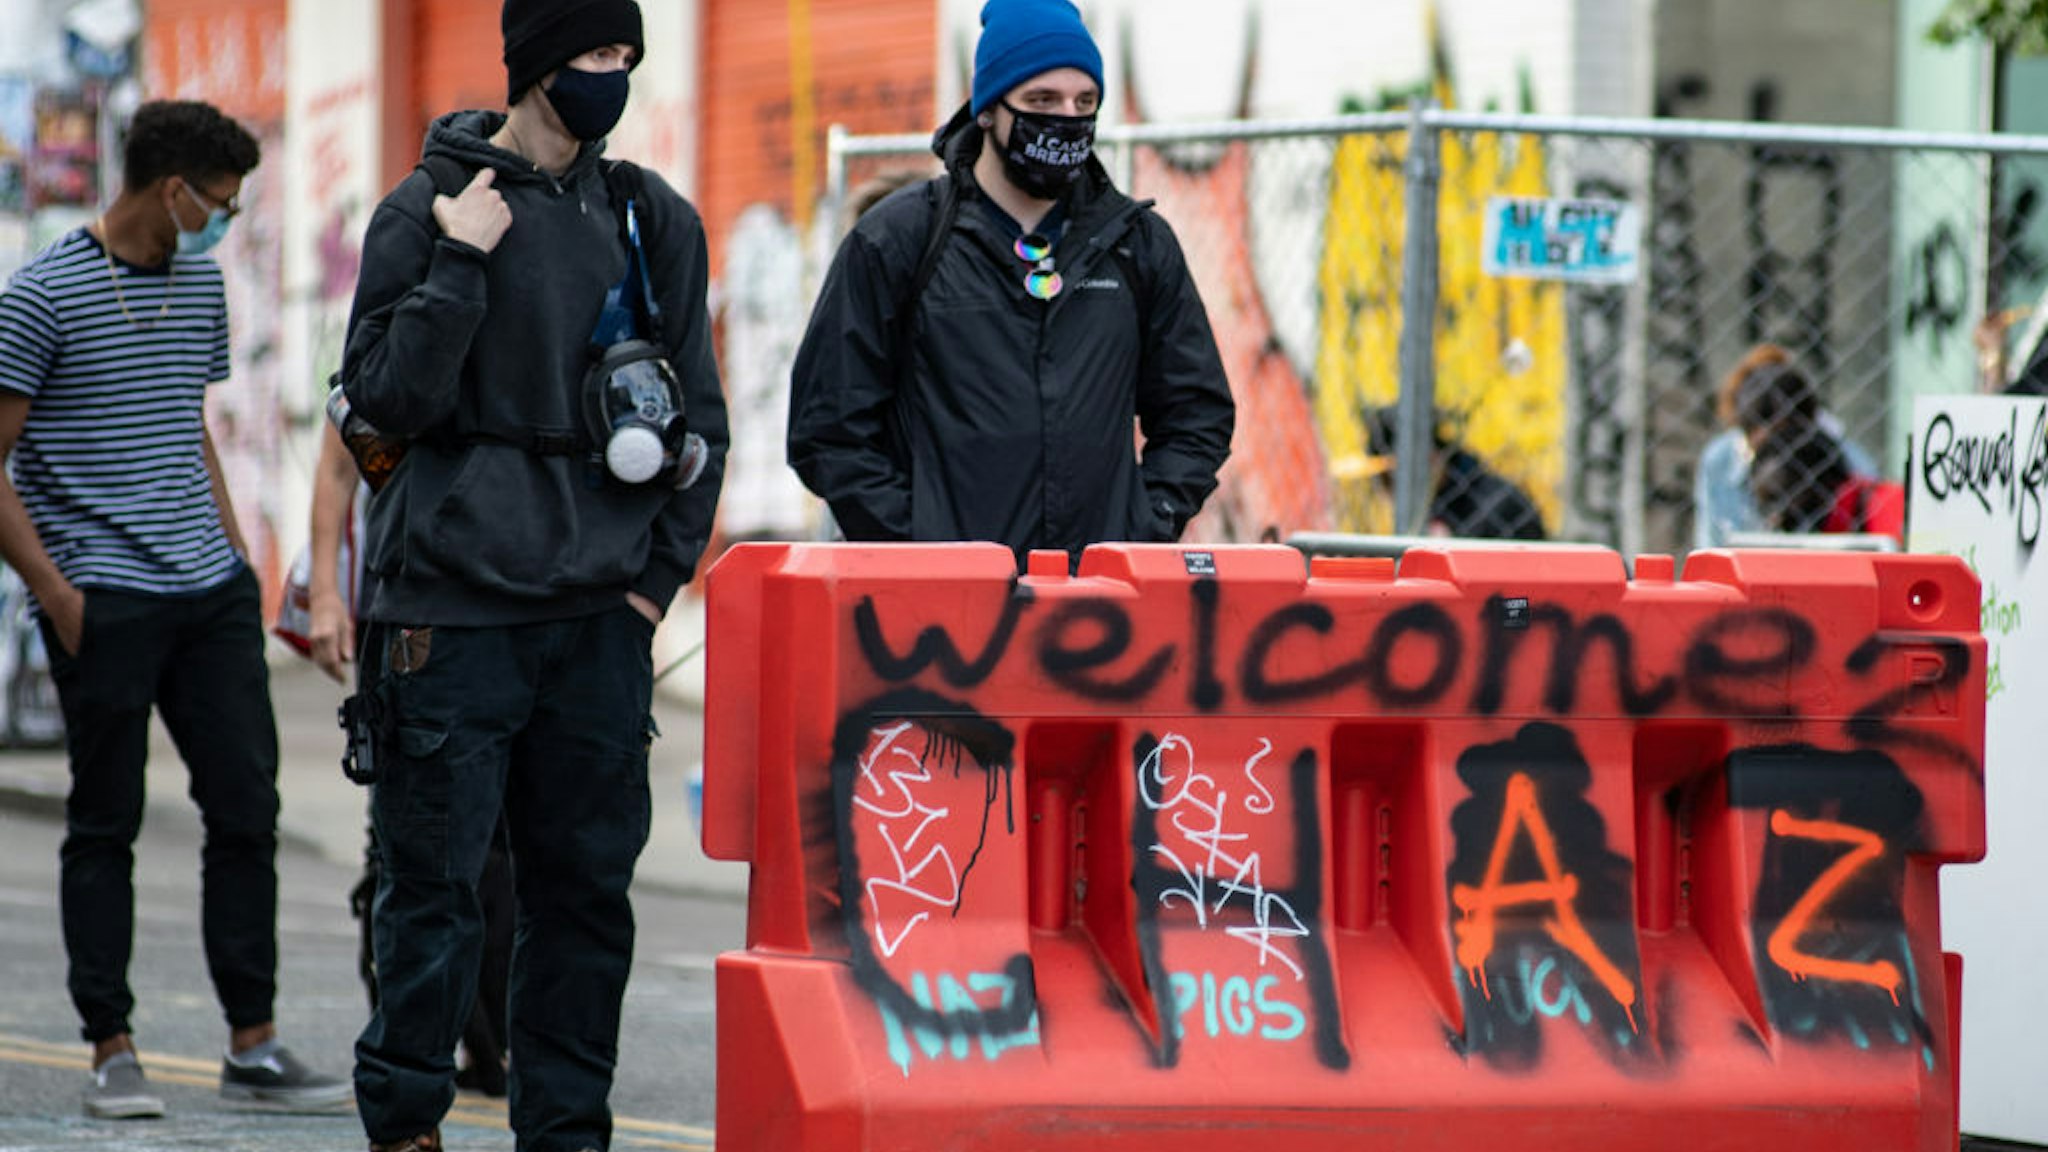 Two people stand at an entrance to the √¢Capitol Hill Organized Protest√¢ formerly known as the √¢Capitol Hill Autonomous Zone√¢ in Seattle, Washington on June 14, 2020. The √¢Capitol Hill Organized Protest√¢ was formed after Seattle Police abandoned its East Precinct during protests against police brutality and the death of George Floyd, an unarmed black man who died after being pinned down by a white police officer in Minneapolis, Minnesota, United States on May 25, 2020. (Photo by Noah Riffe/Anadolu Agency via Getty Images)